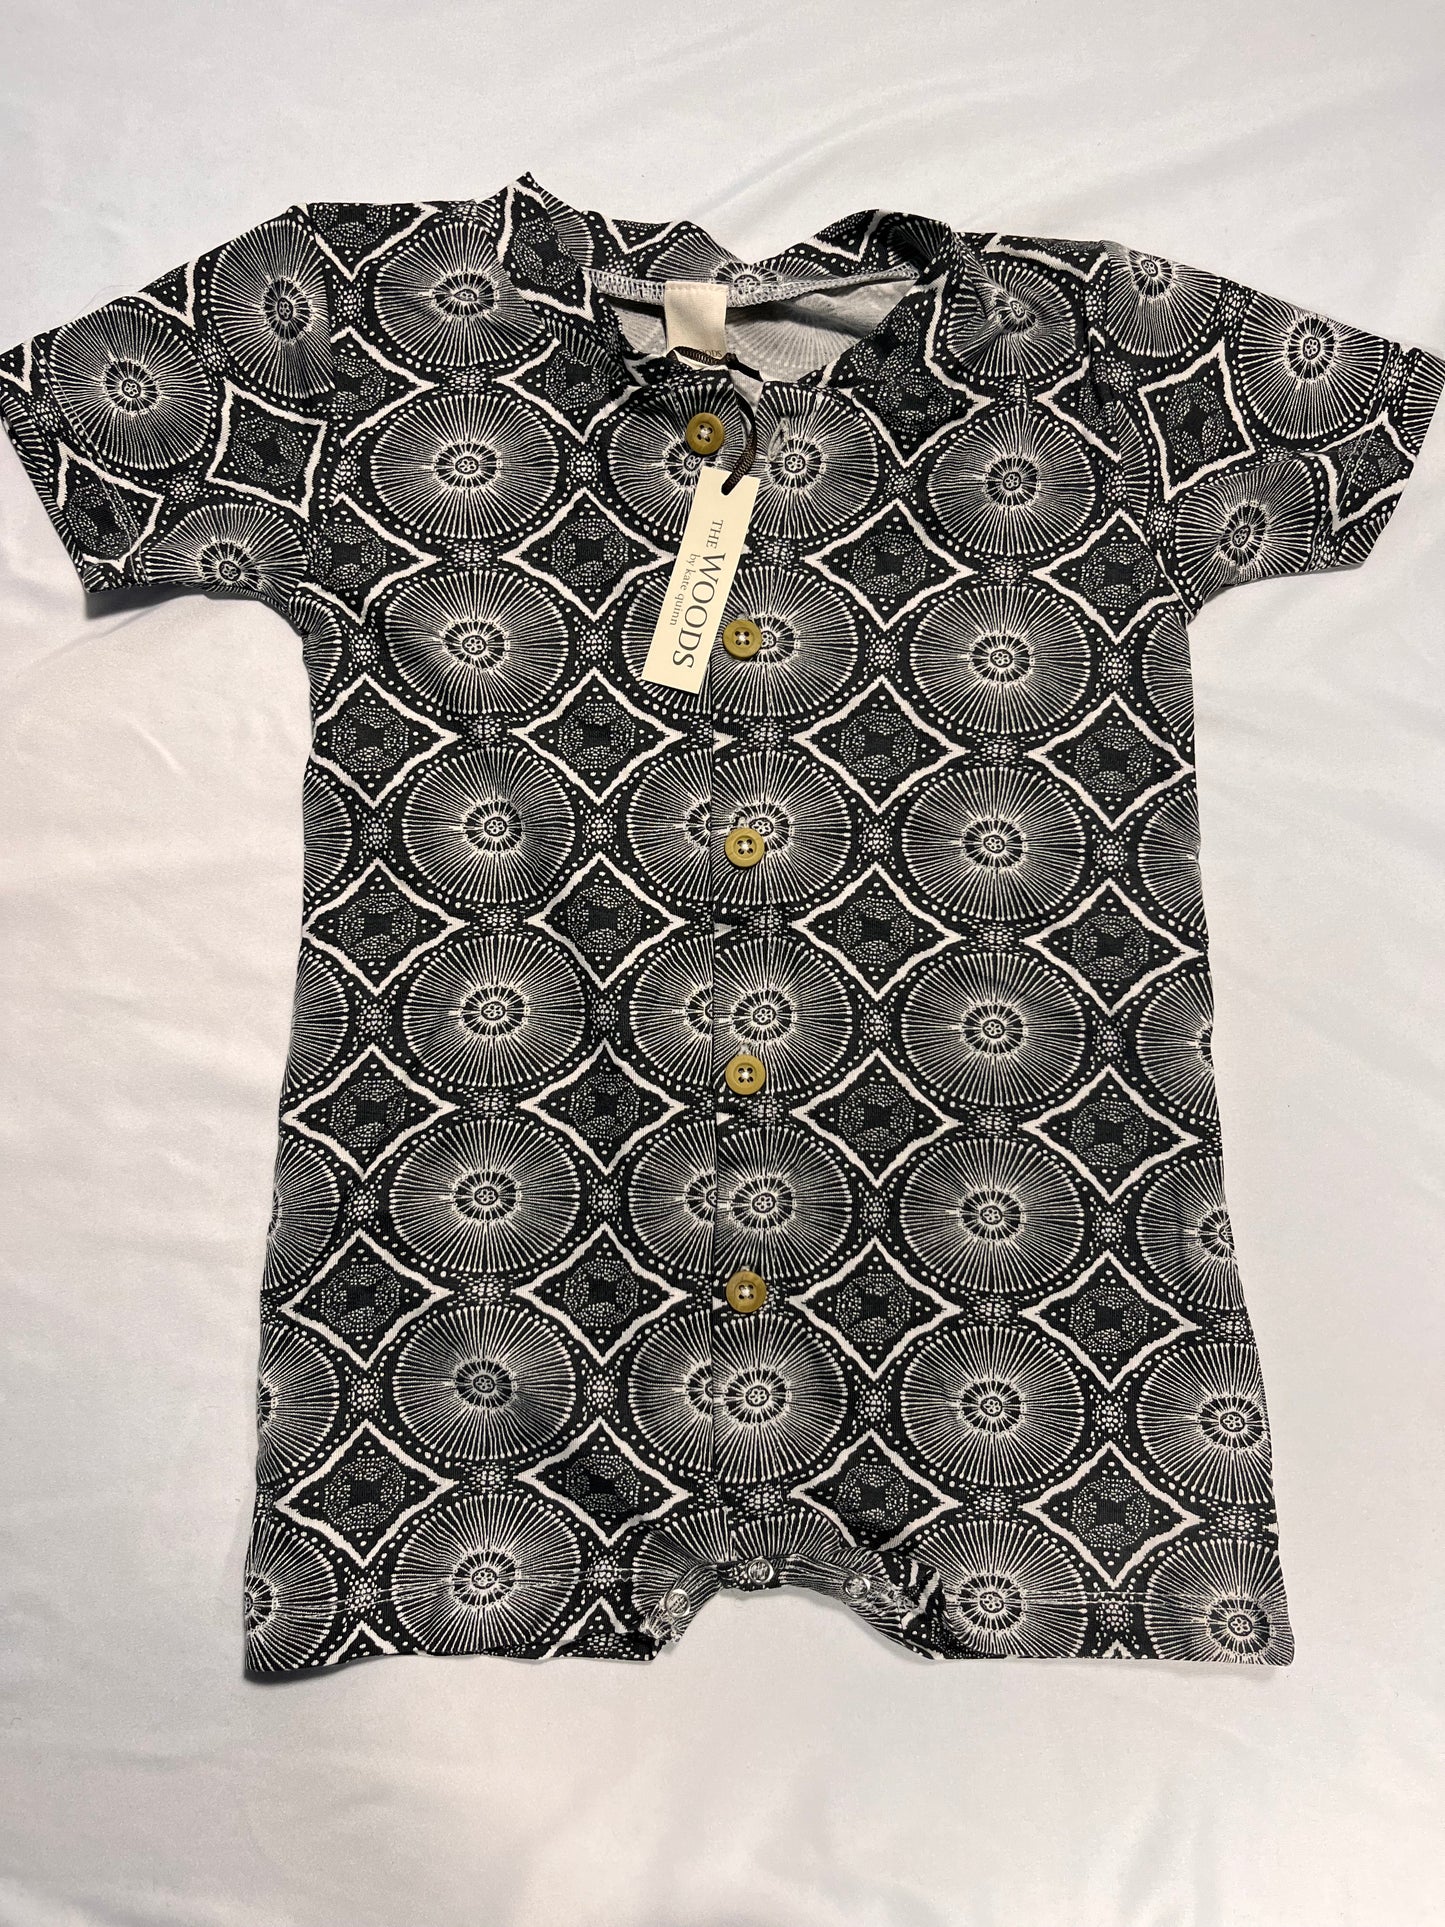 Kate Quinn 2t romper new with tags.